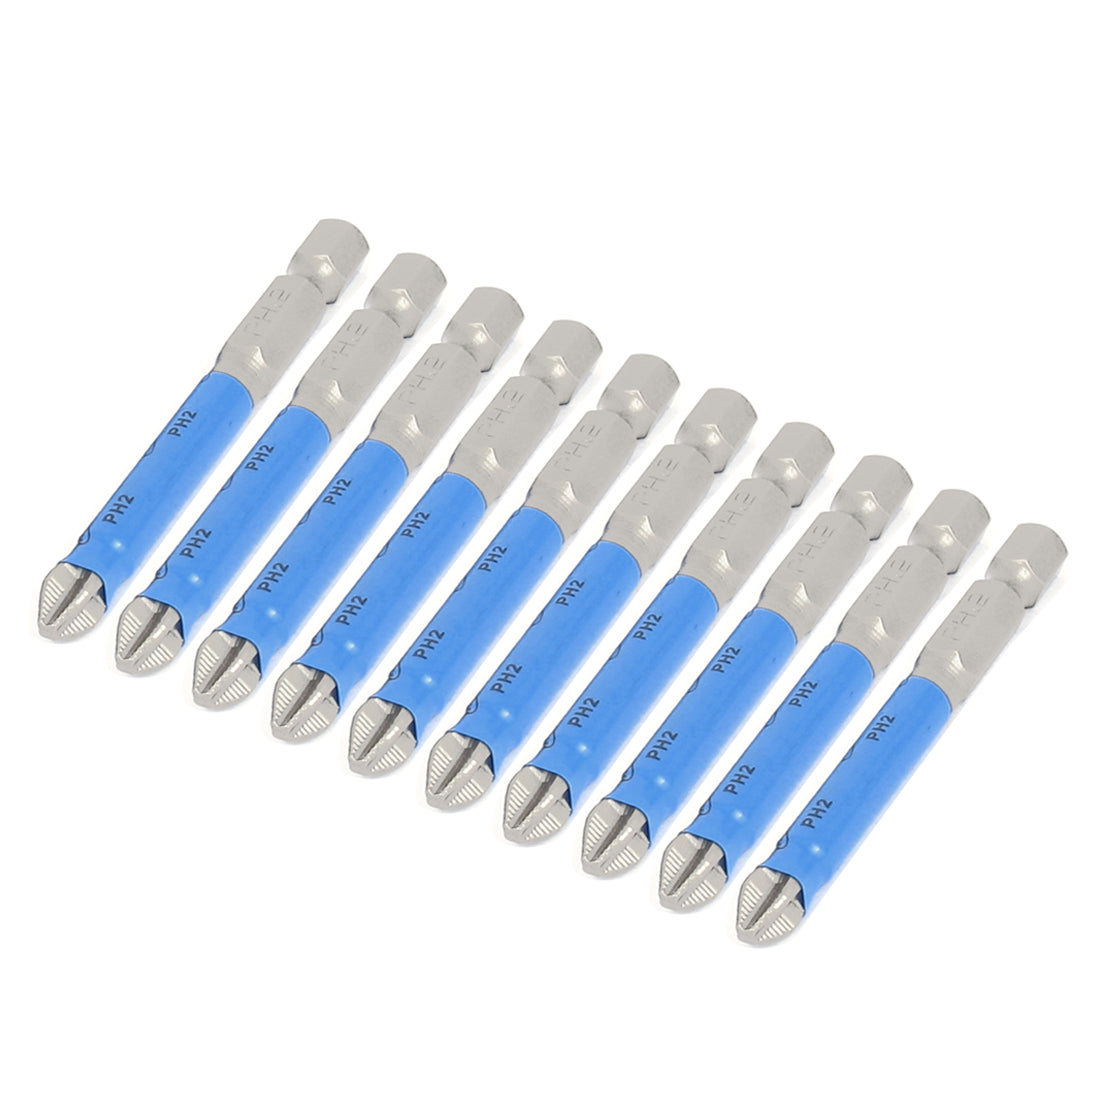 uxcell Uxcell 10 Pcs S2 Steel Anti-Slip Magnetic PH2 Phillips Tip Screwdriver Bits 65mm Long with Non-slip Plastic Sleeve